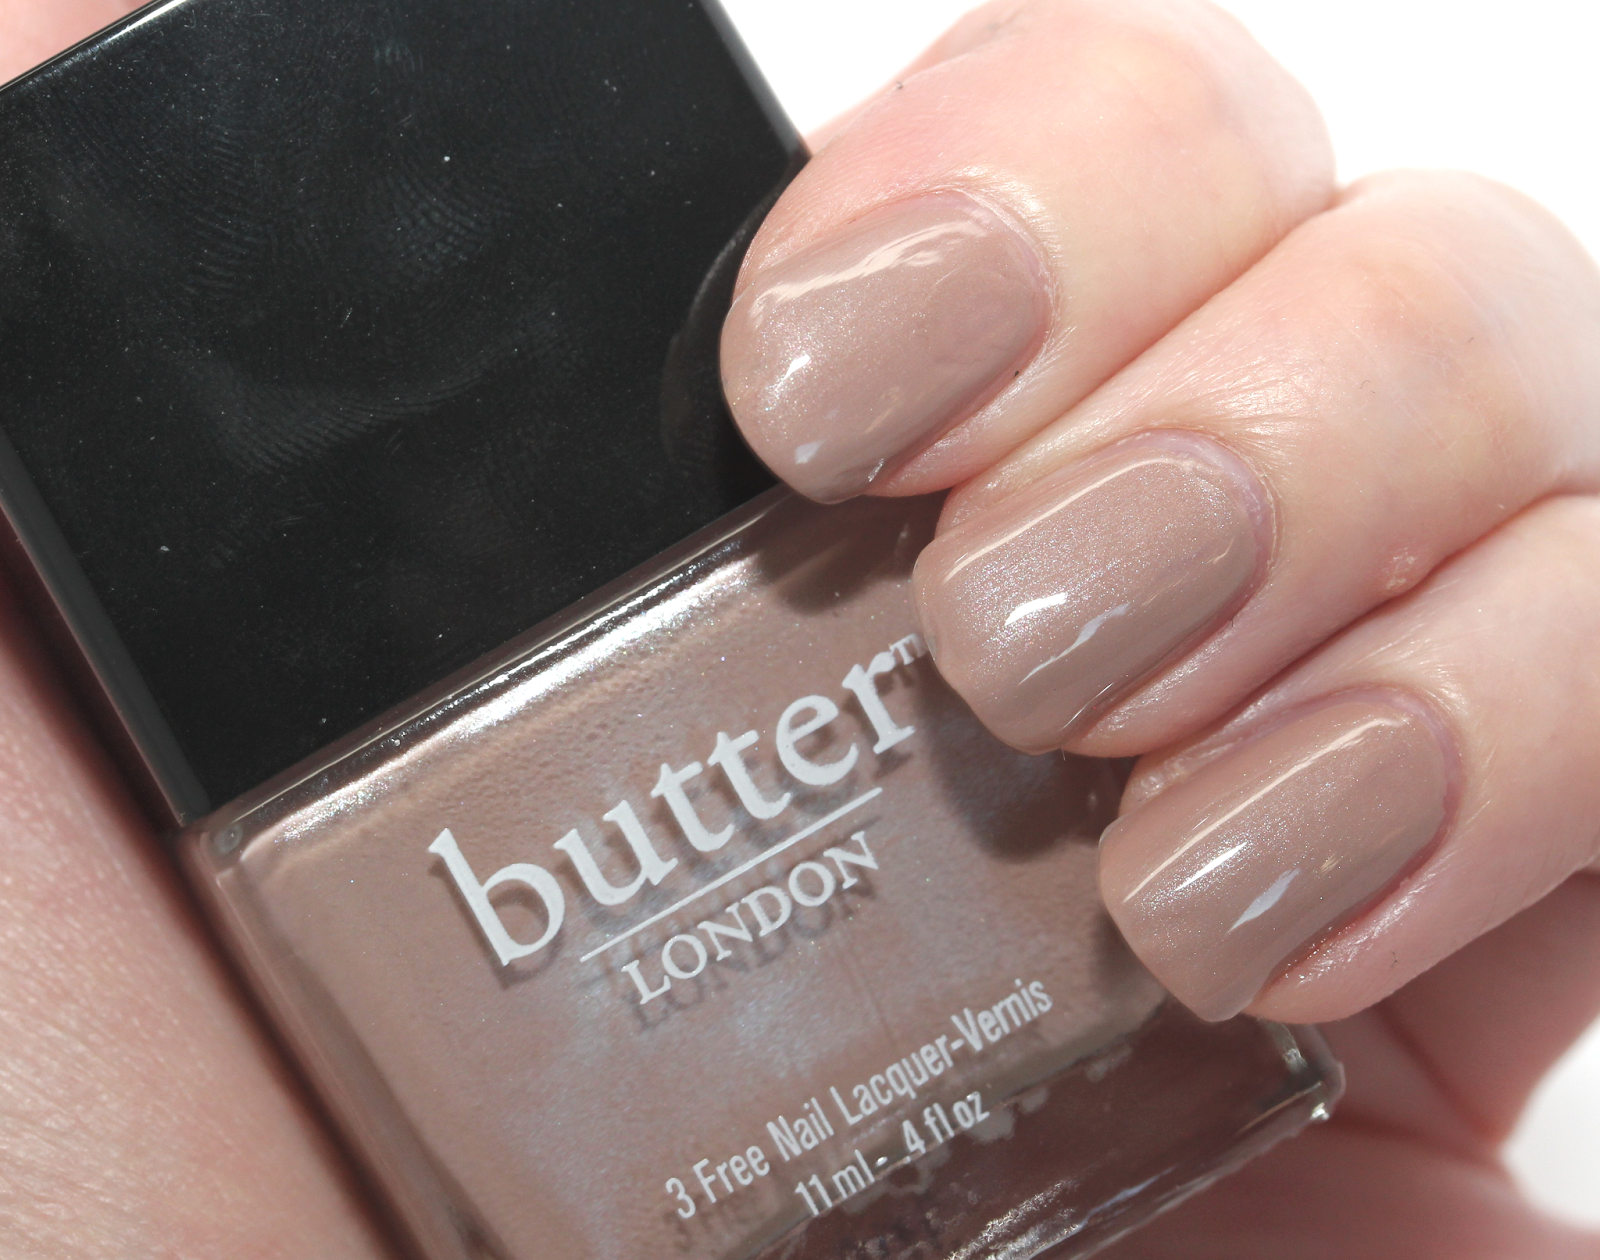 10. Butter London Nail Lacquer in "Come to Bed Red" - wide 2